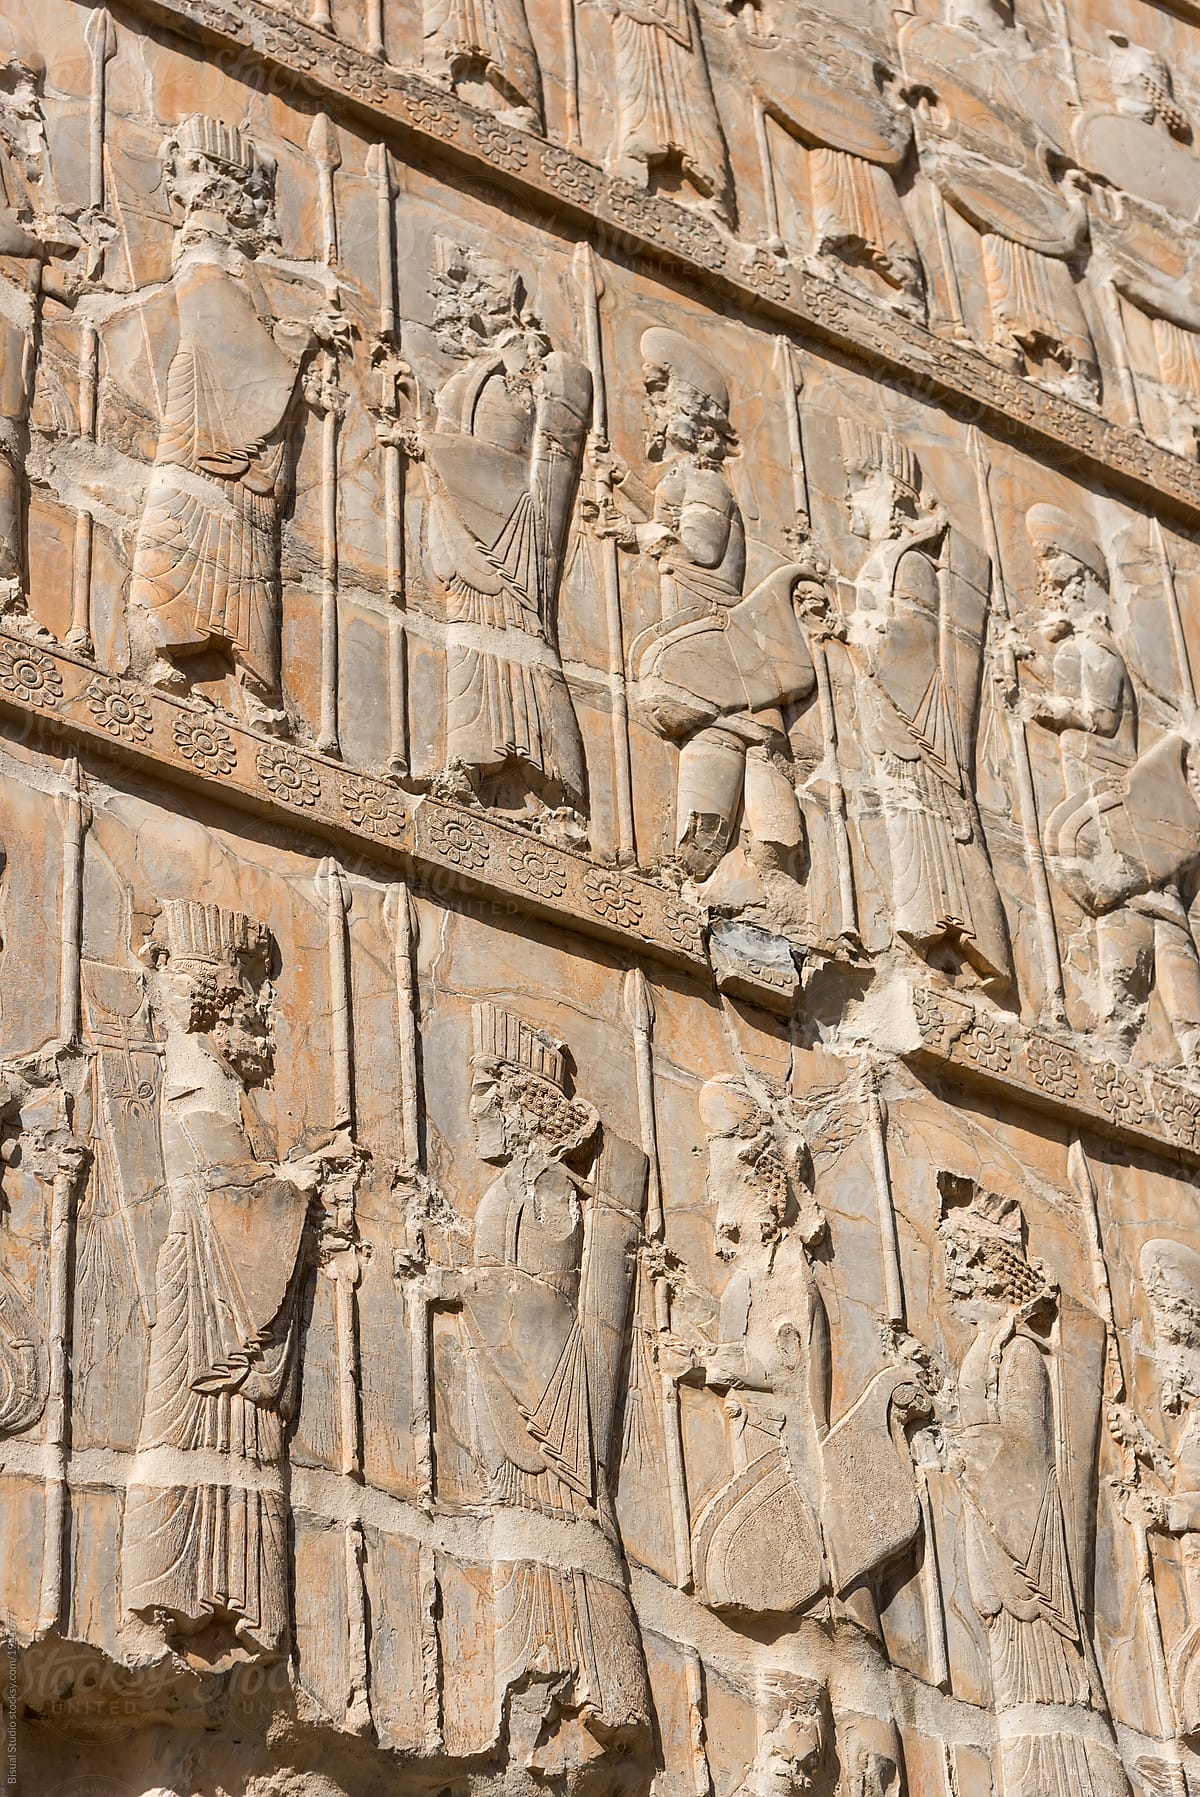 Relief in stone wall of ancient temple